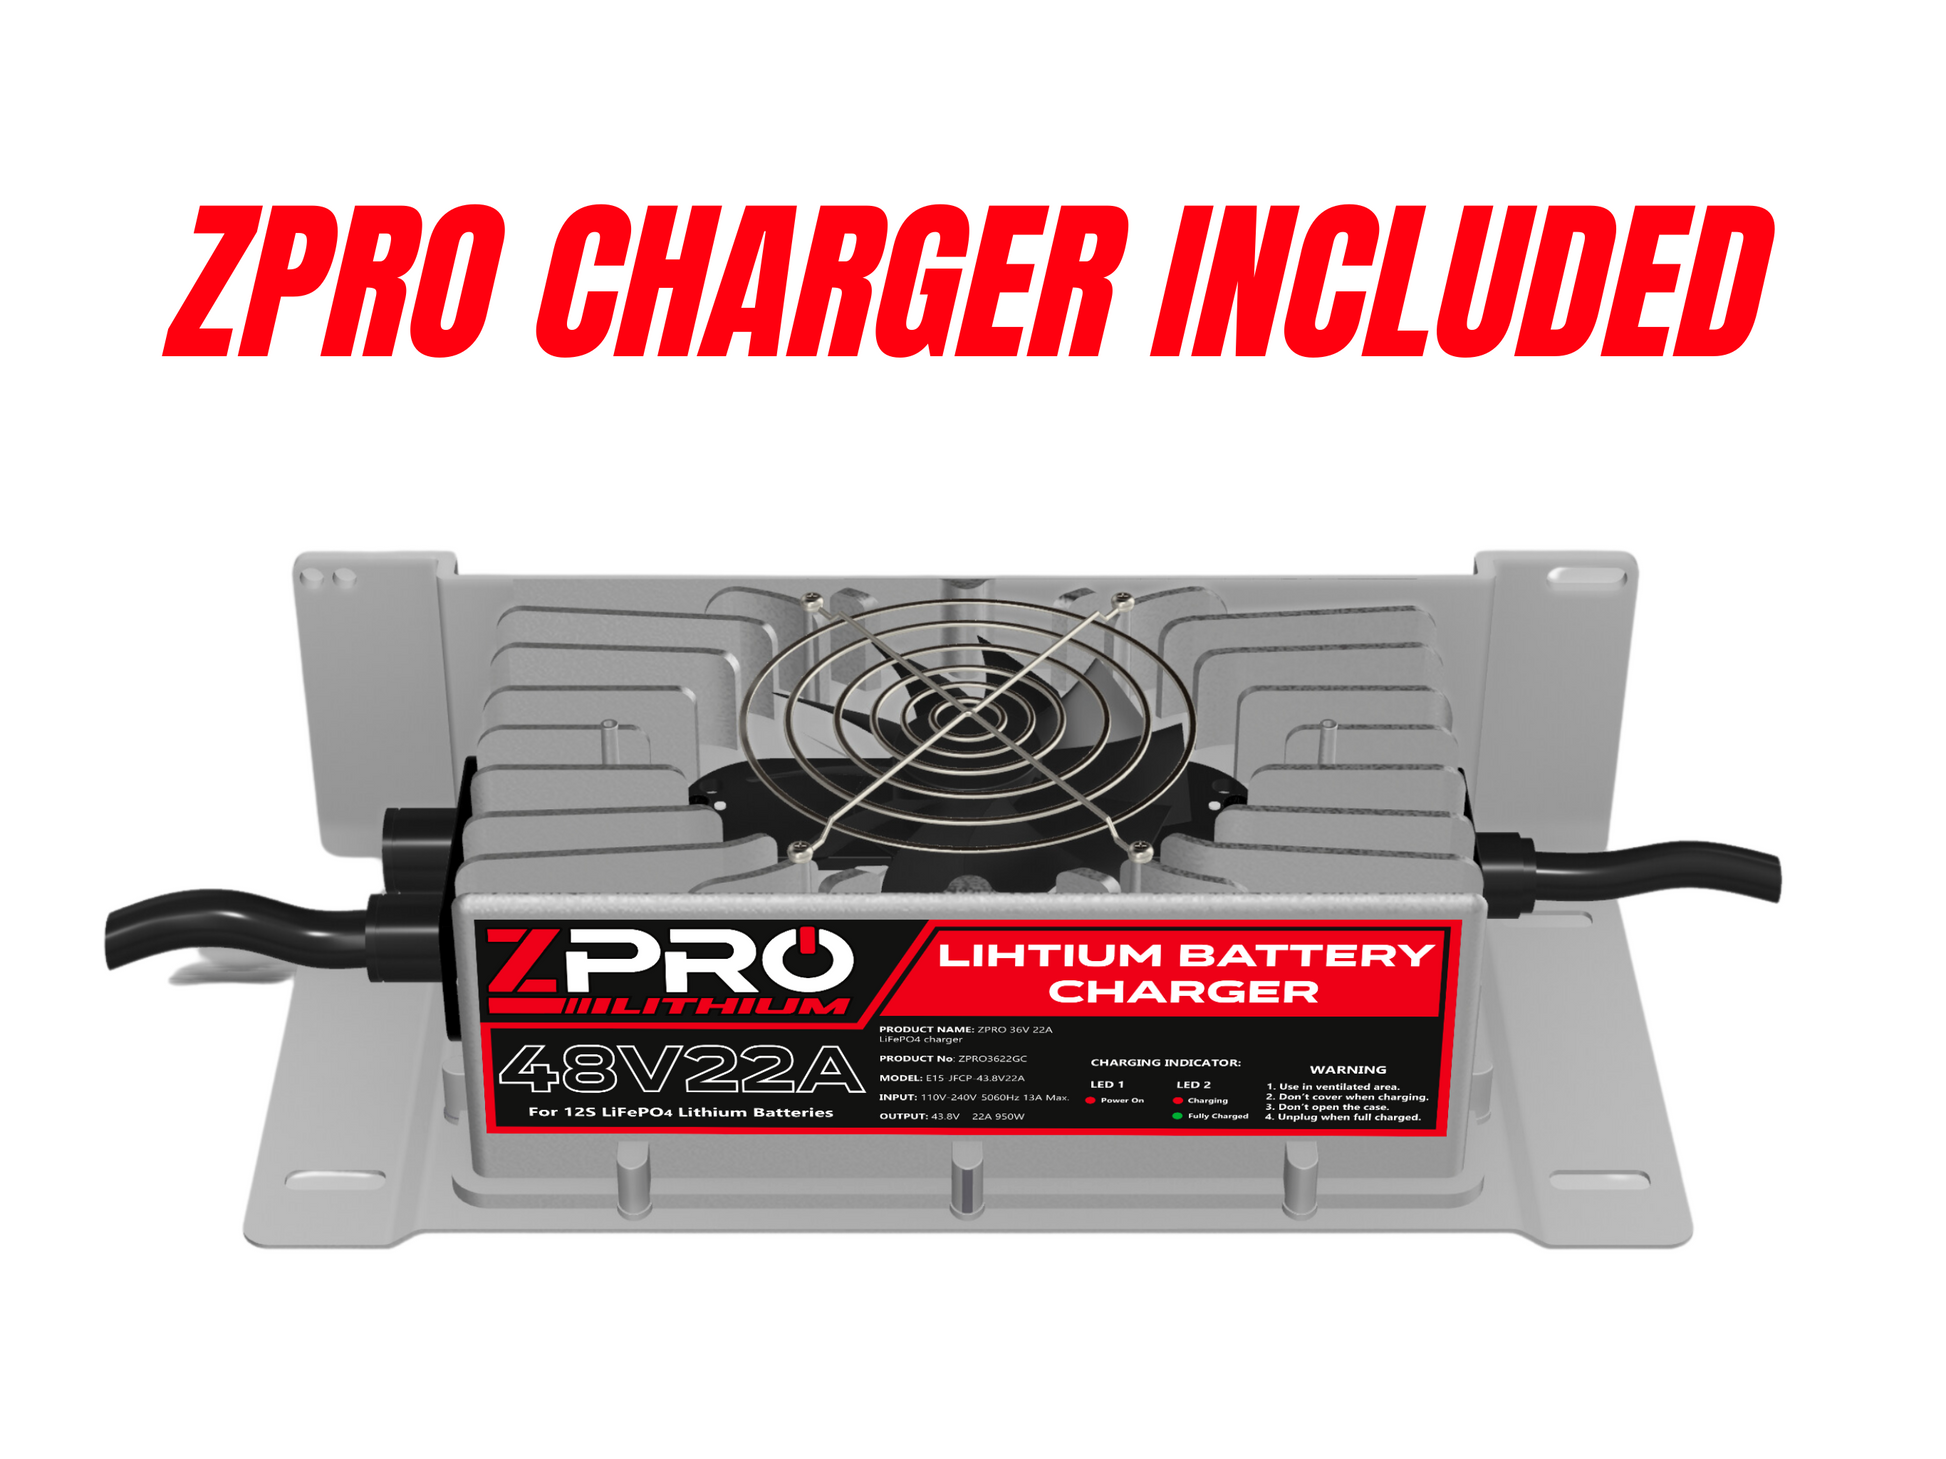 ZPRO Lithium Charger 48V 22A